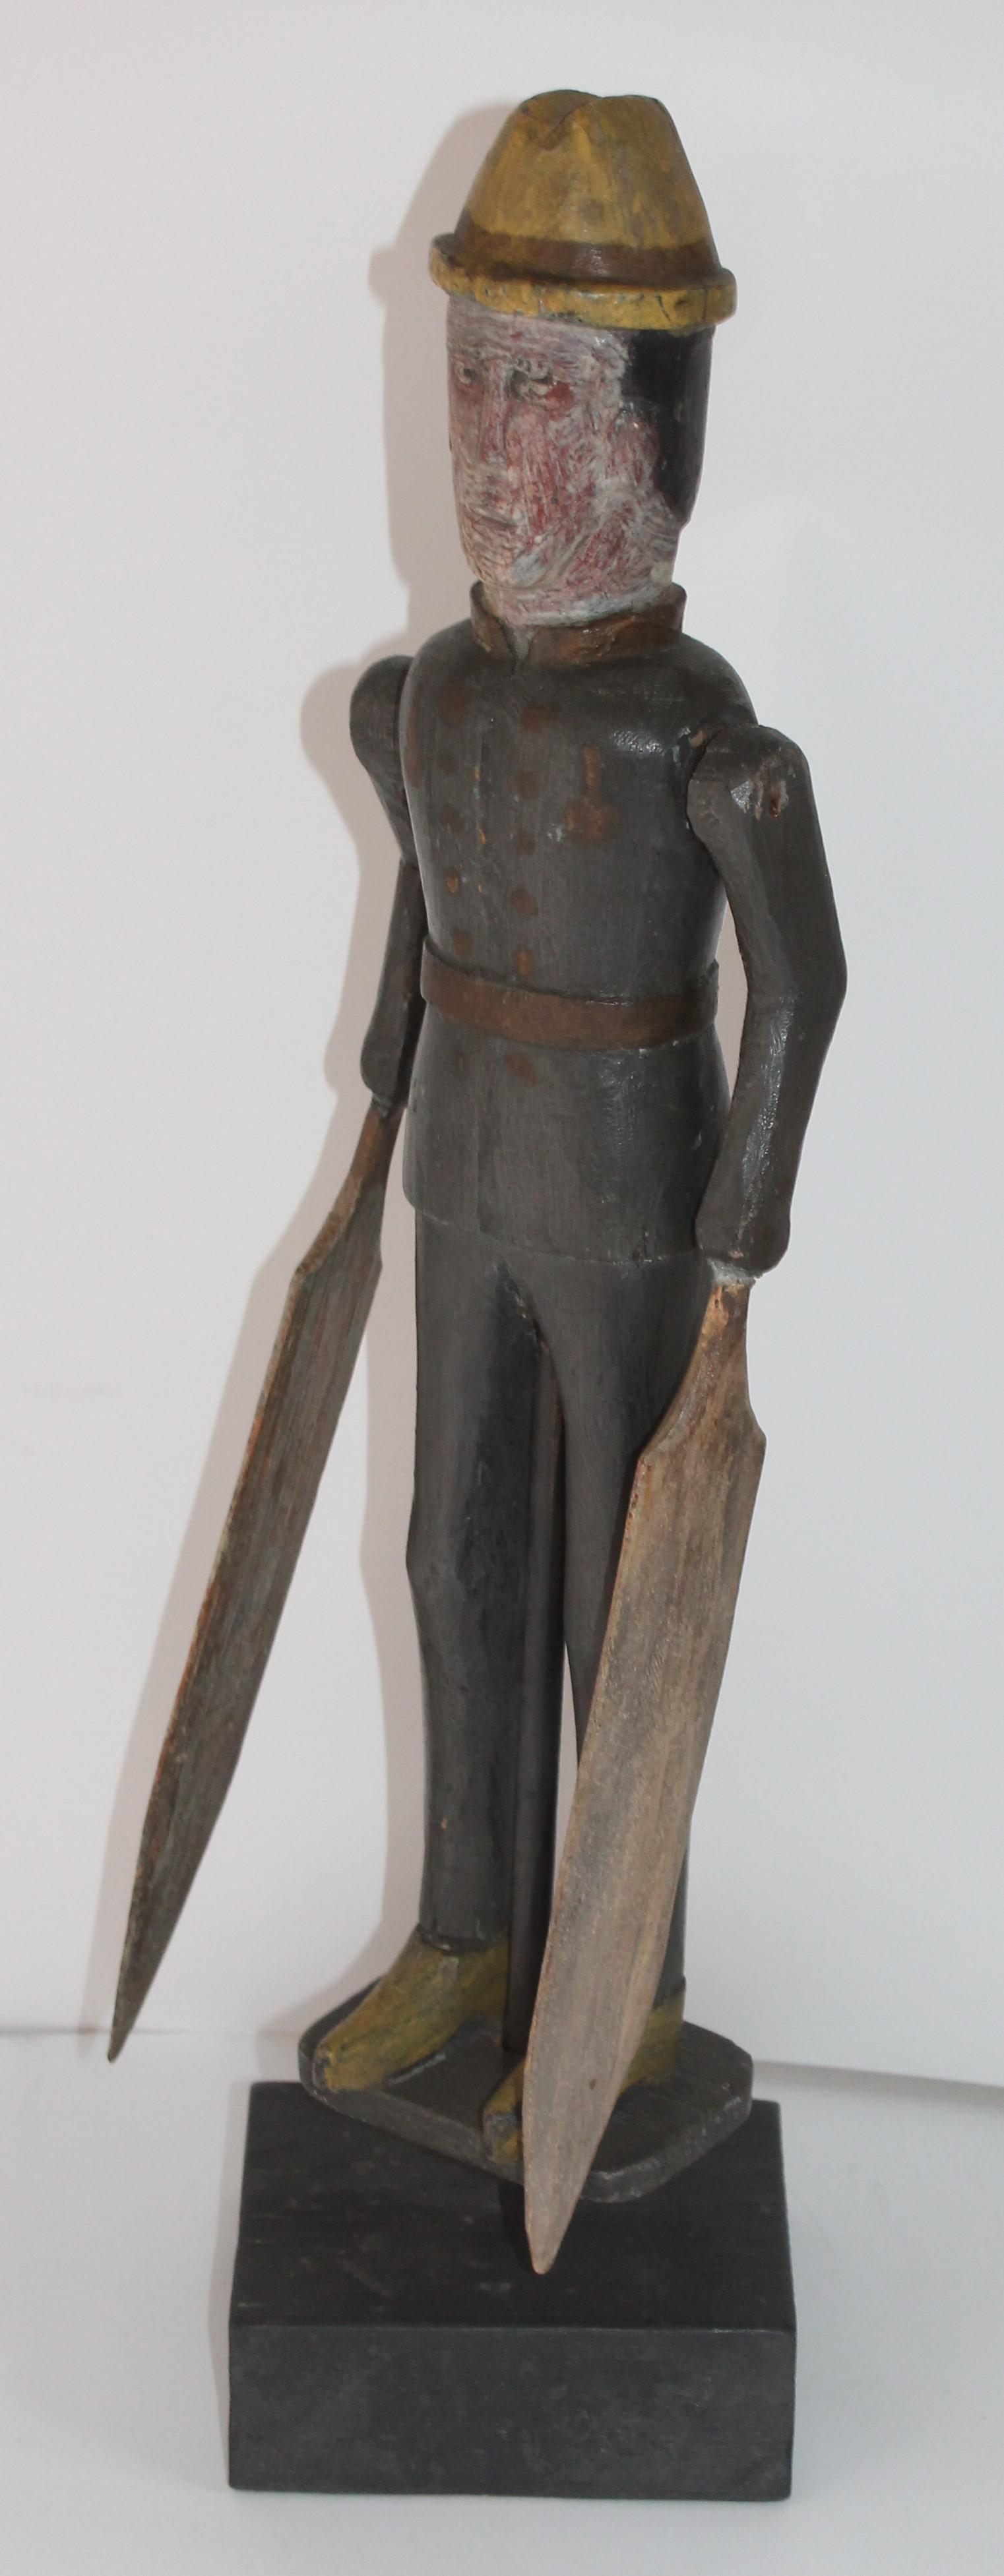 This amazing original painted folky whirlygig of a soldier is in good condition and on a block of wood that is its stand. The original blades have been re-glued at one time, but are also original to the piece. The carving is very crude with a nice